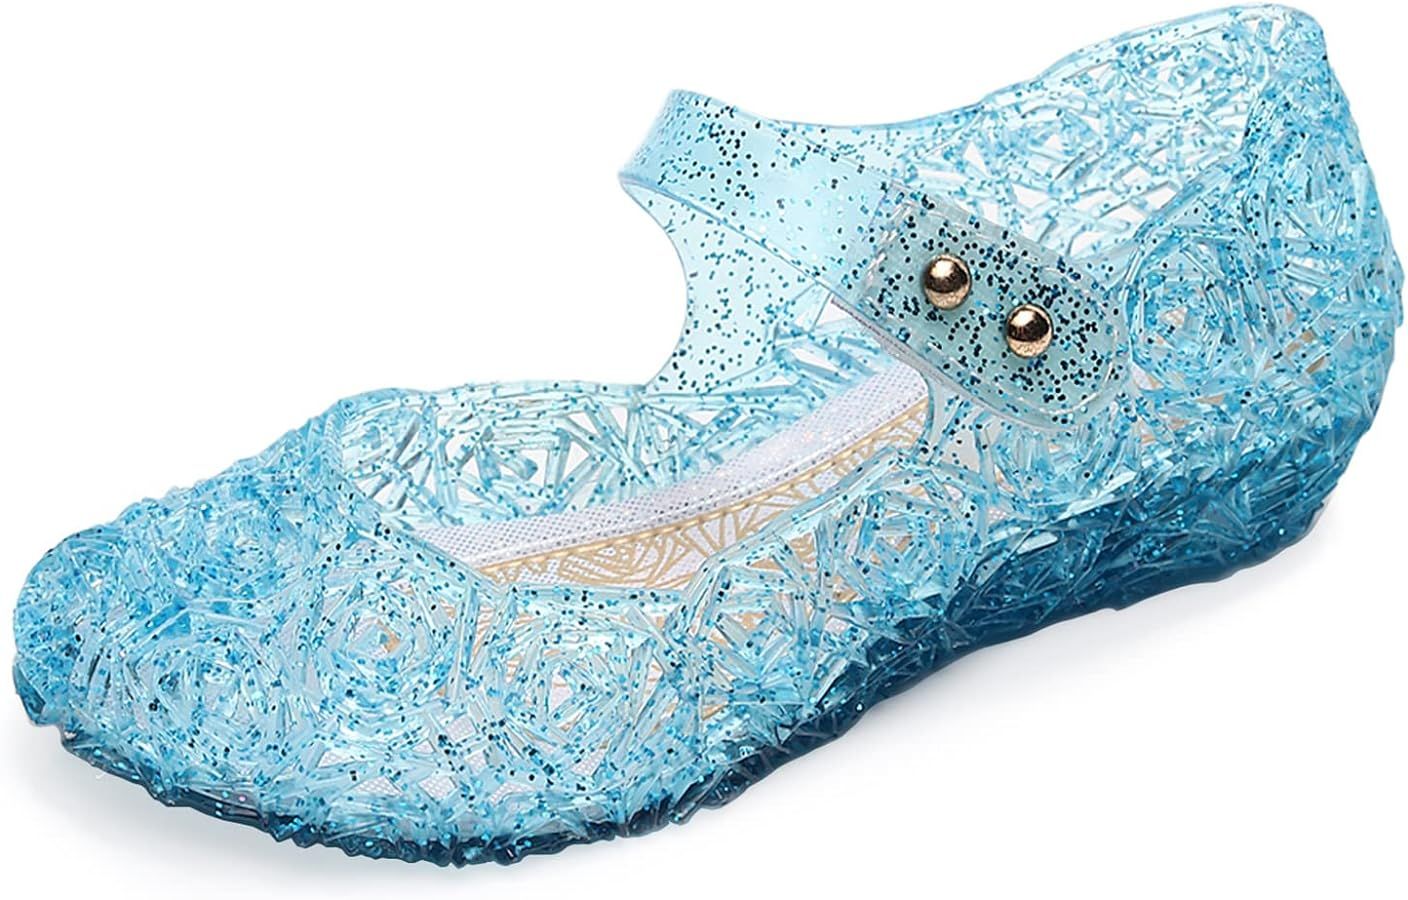 Jelly Shoes for Girls, Snow Queen Princess Birthday Sandals for Little Girls, Blue Toddler Glitter Sandals Size 9, Frozen Inspired Party Cosplay Costumes Dress Flats | Amazon (US)